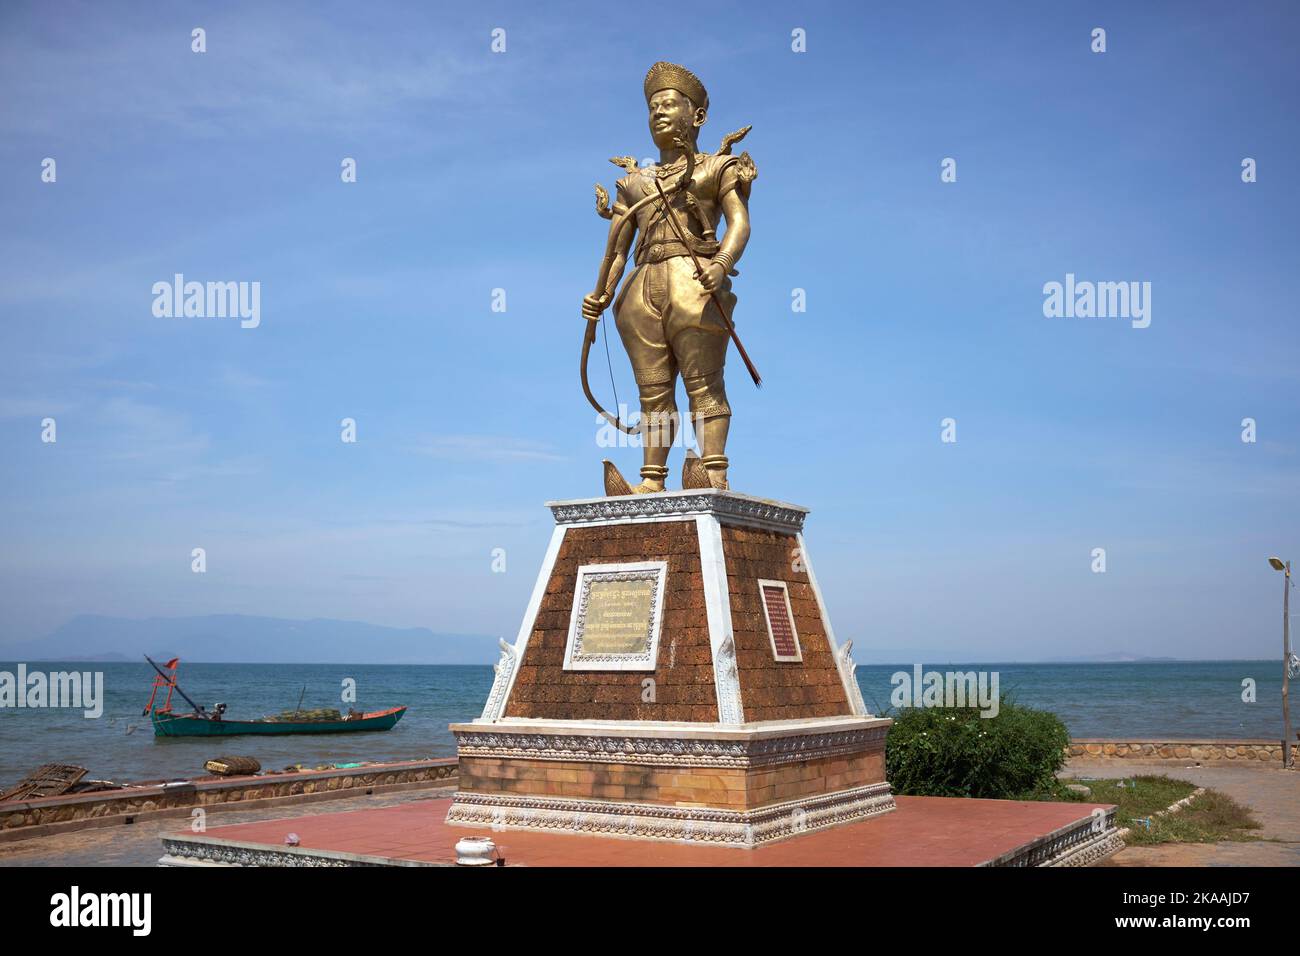 Statue of Sdech Korn (Srei Chettha II) King of Cambodia at the Fishing Village Crab Market in Kep Cambodia Stock Photo